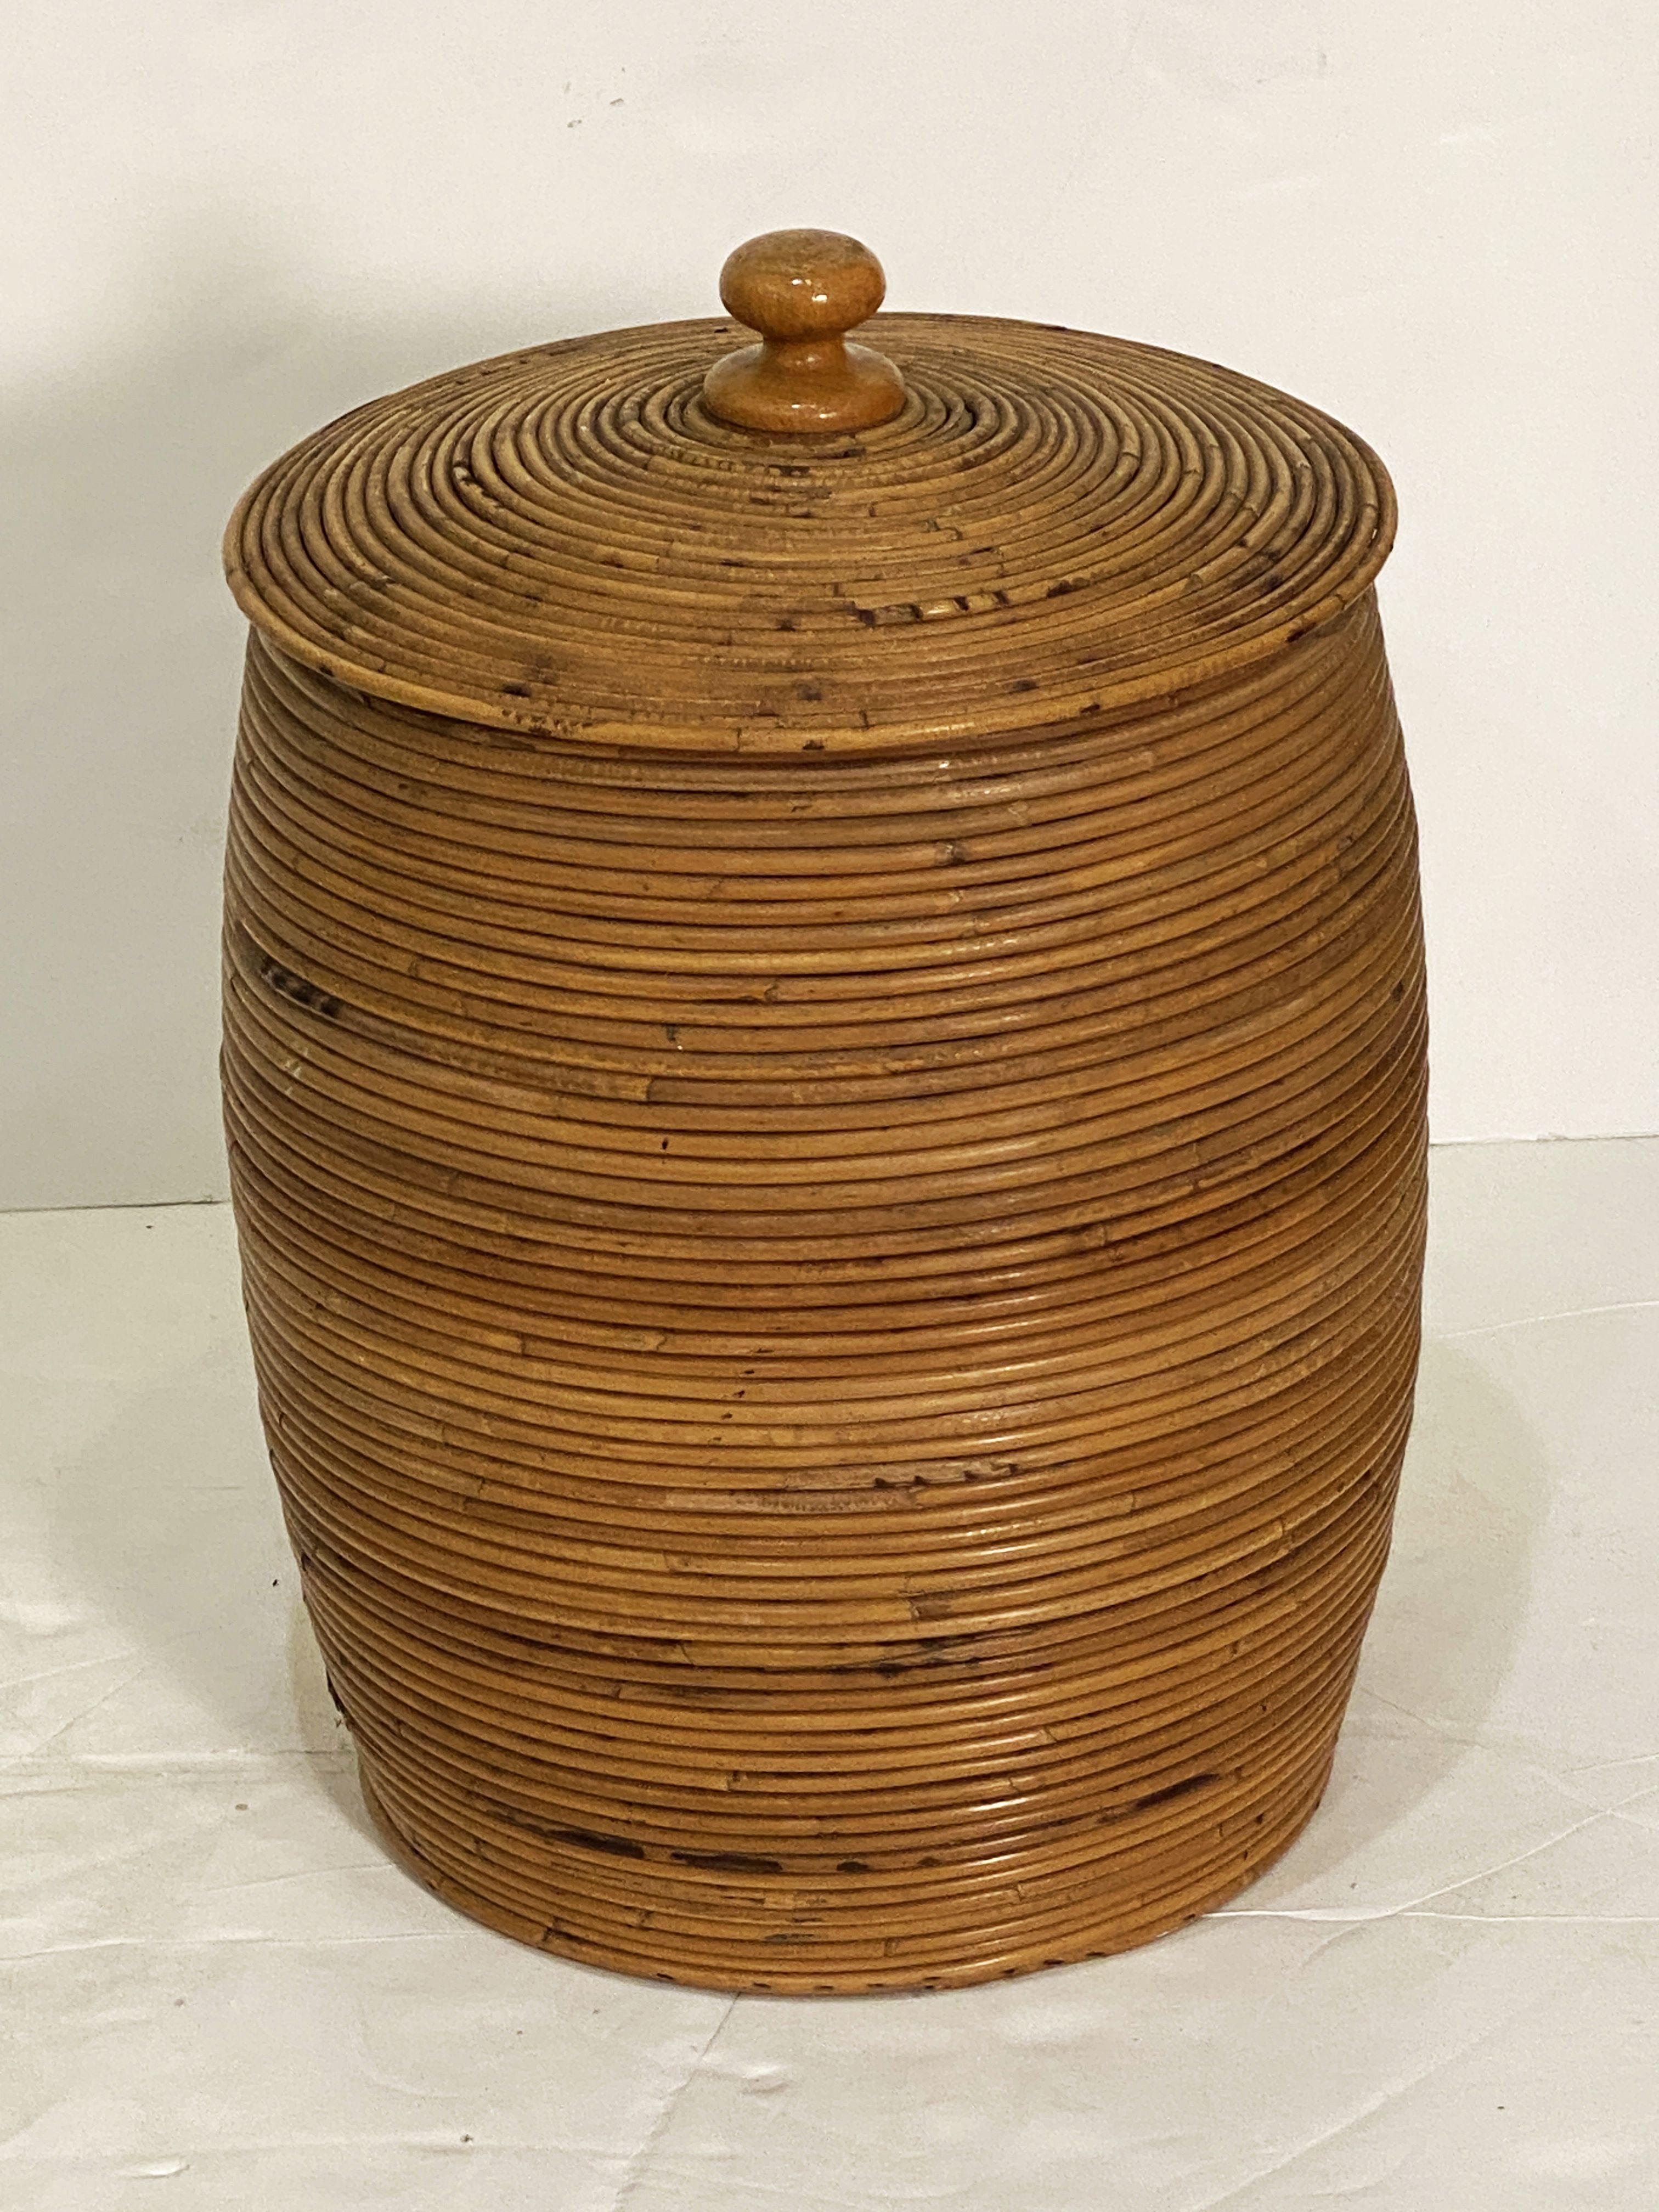 Hand-Woven Large French Round Basket Container of Spiral-Work Cane with Lid For Sale